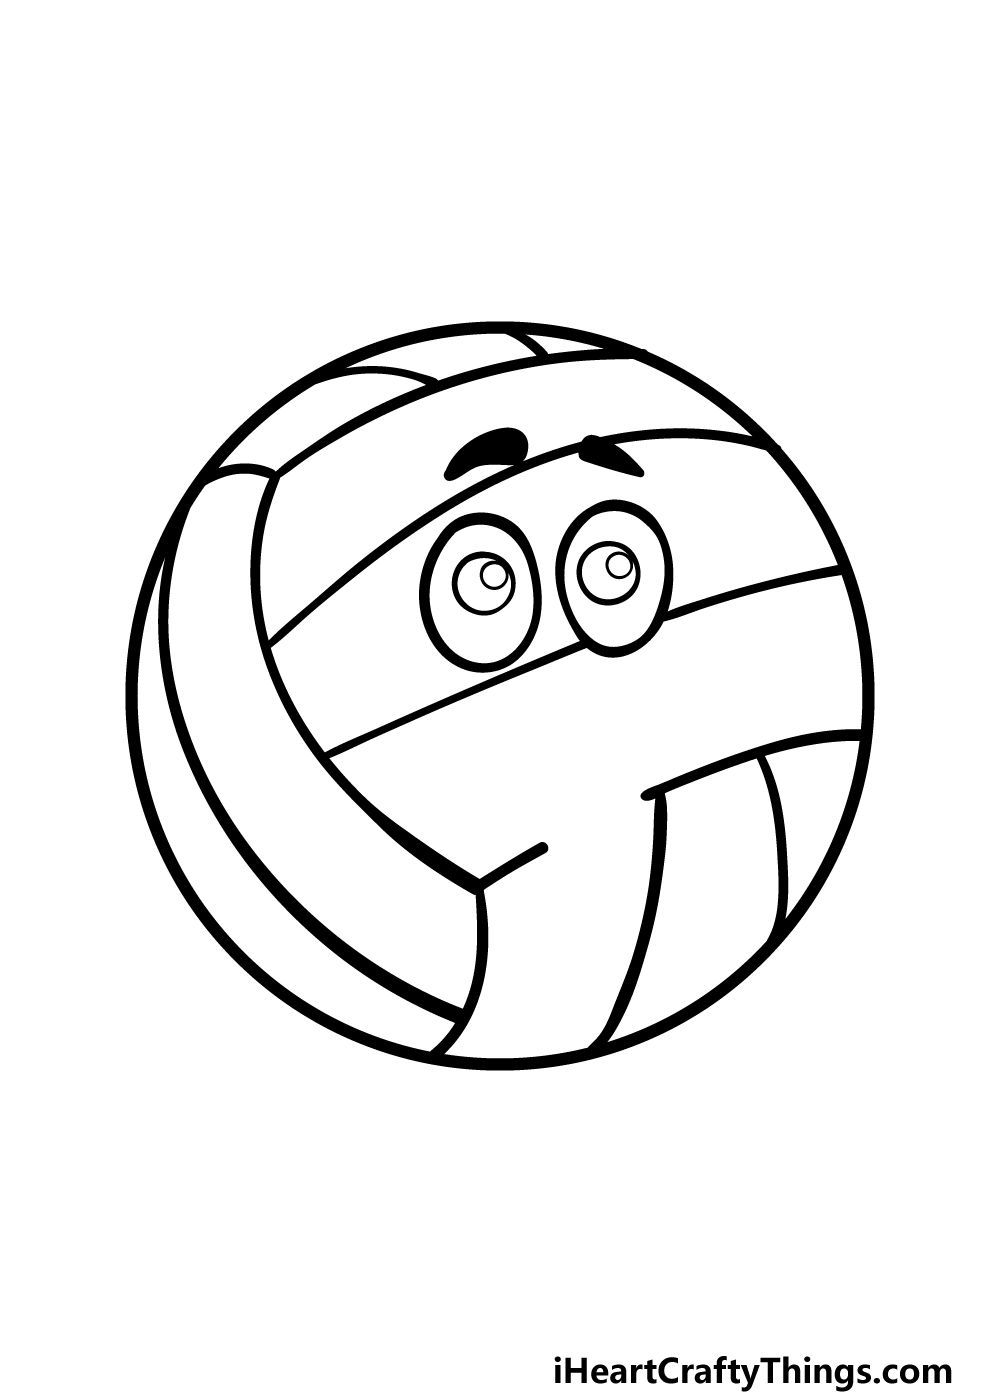 Cartoon Volleyball Drawing - How To Draw A Cartoon Volleyball Step By Step